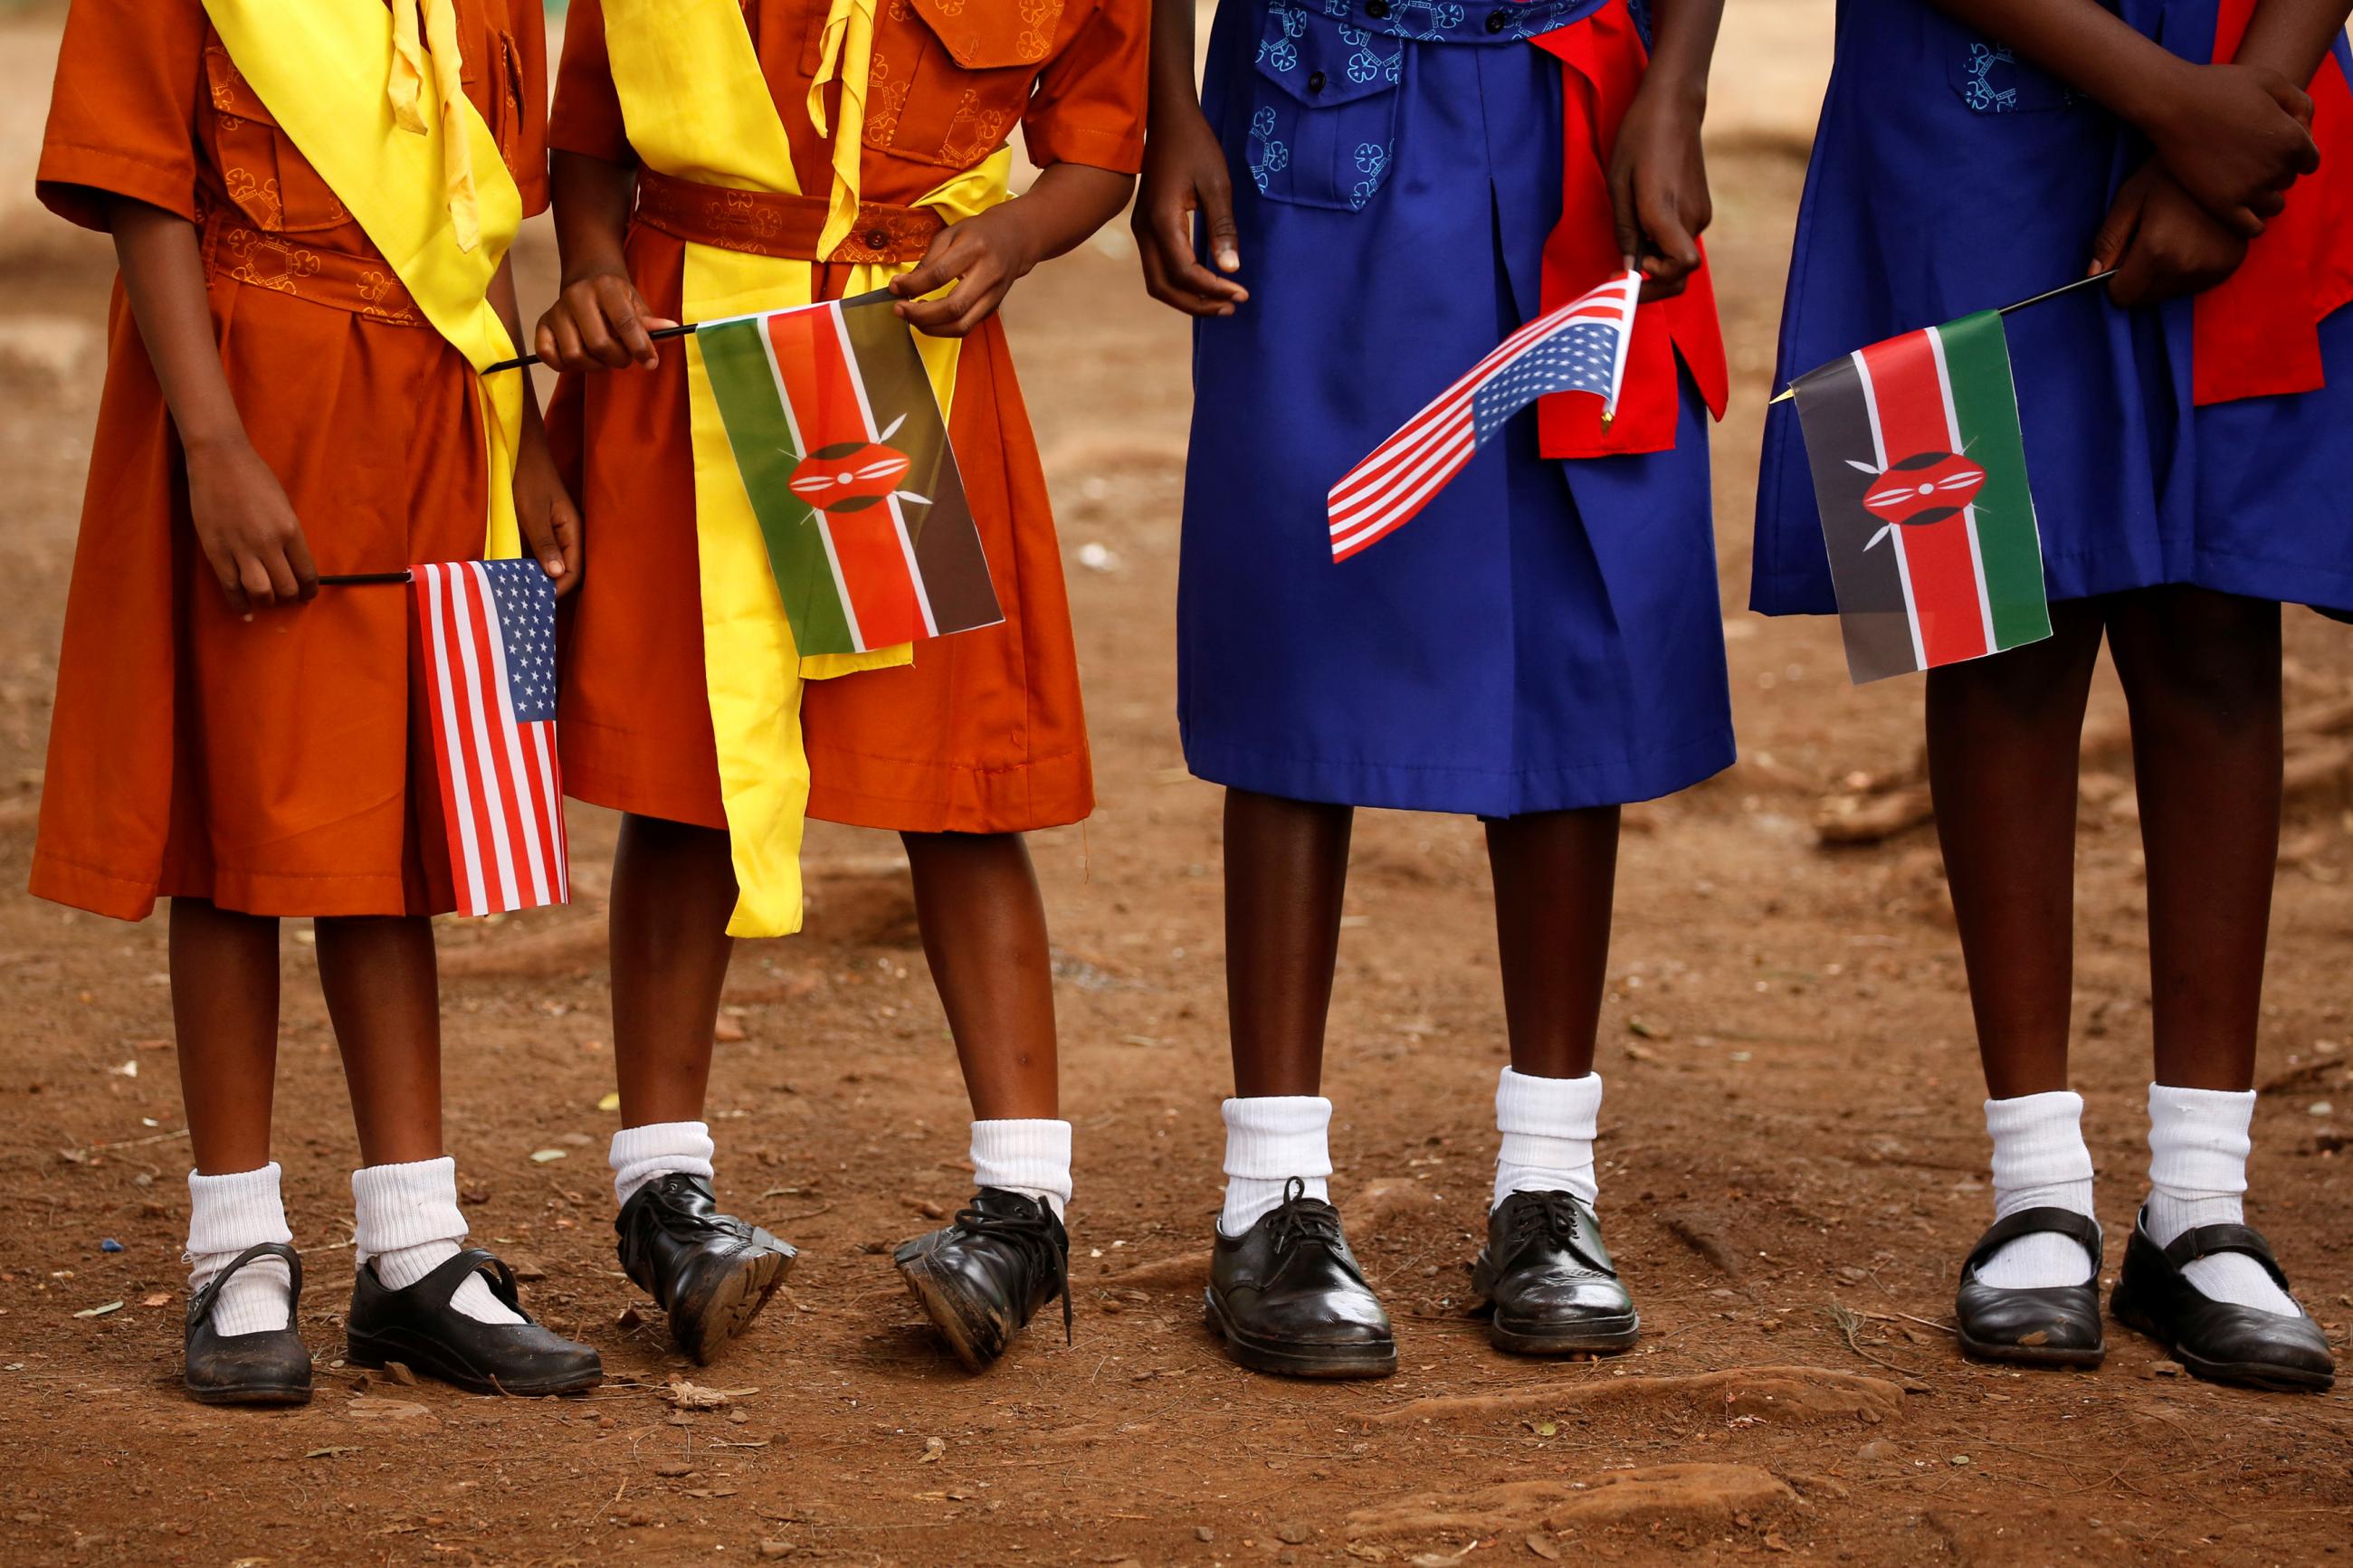 Young girls with U.S. and Kenya flags wait to greet U.S. Ambassador to Kenya Robert Godec as he visits a President's Emergency Plan for AIDS Relief (PEPFAR) project for girls' empowerment in Nairobi, Kenya, March 10, 2018. 